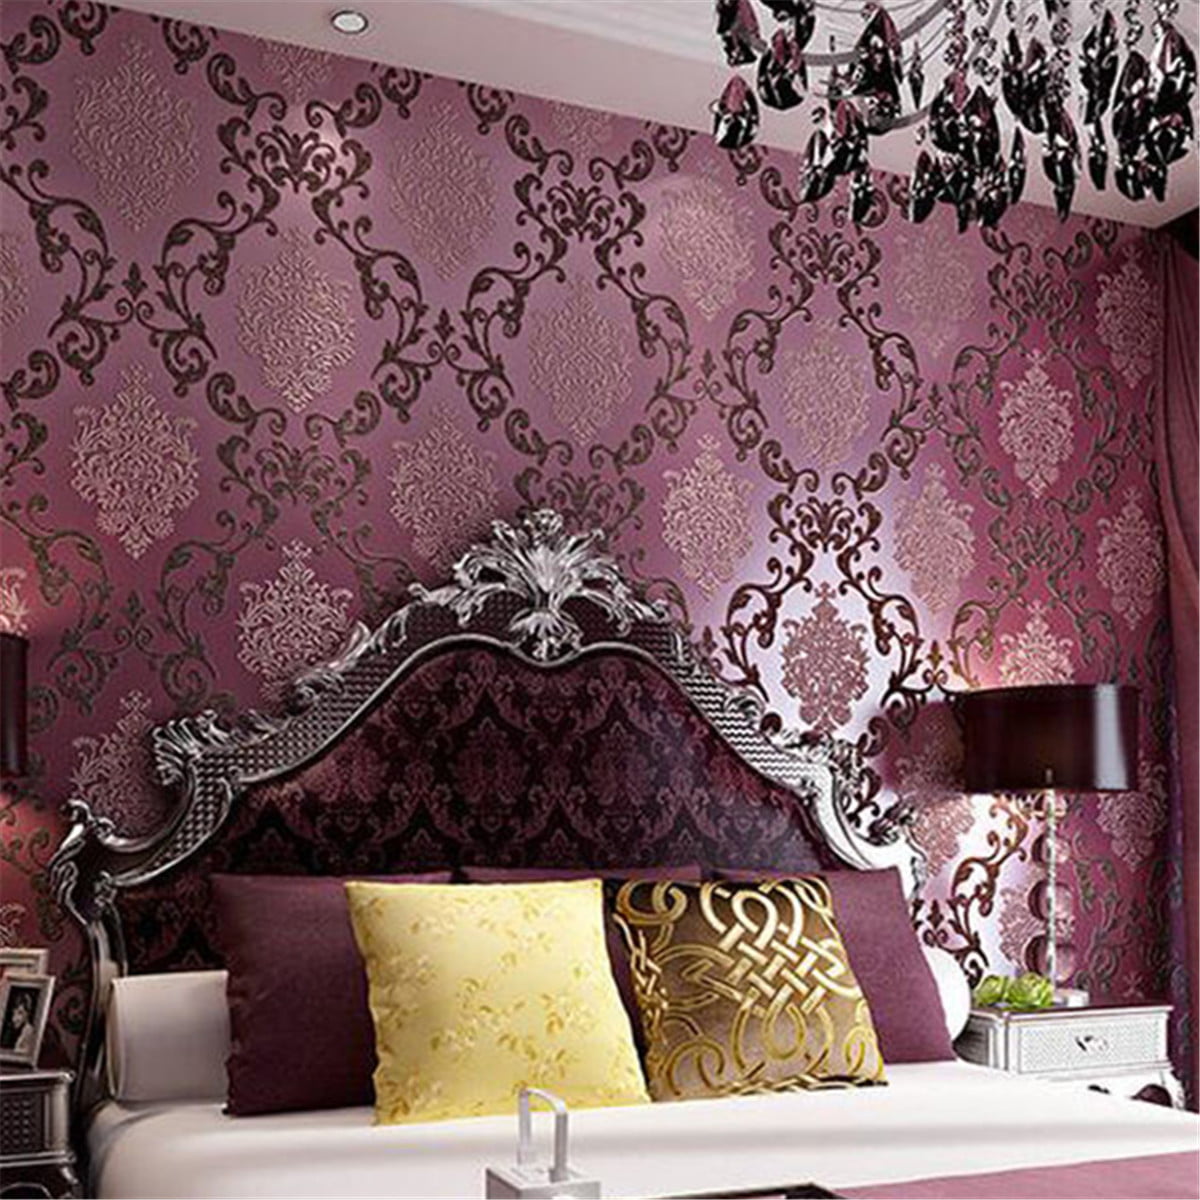 Modern Luxury Purple 10m 3d Damask Embossed Textured Feature Mural Wallpaper Roll Wall Decor For Living Room Bedroom Tv Background